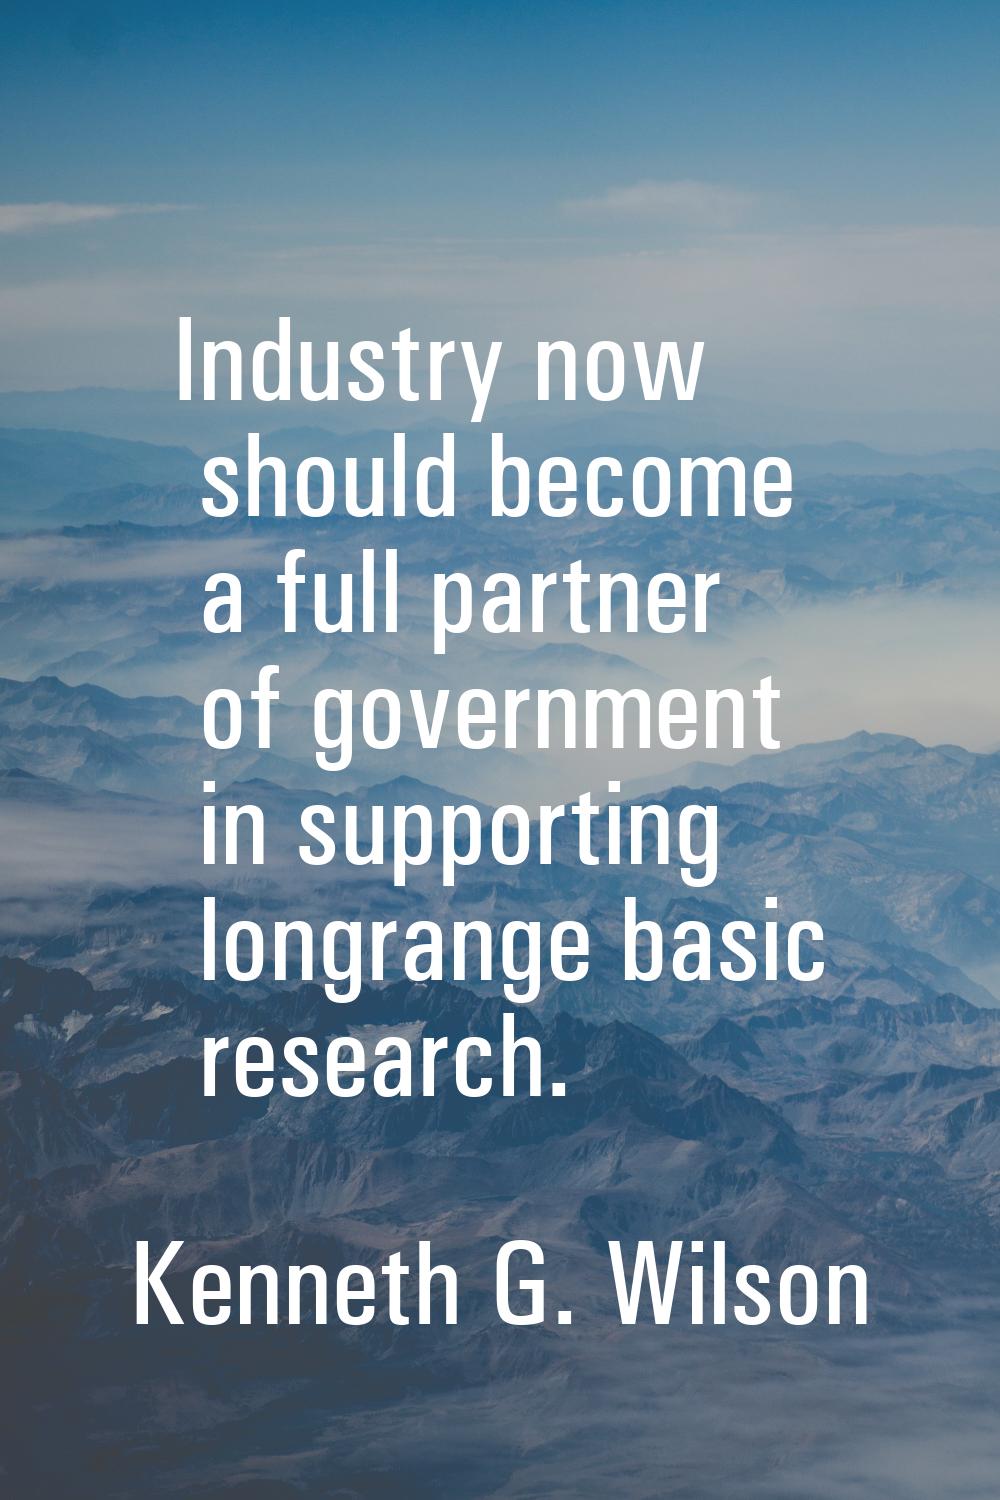 Industry now should become a full partner of government in supporting longrange basic research.